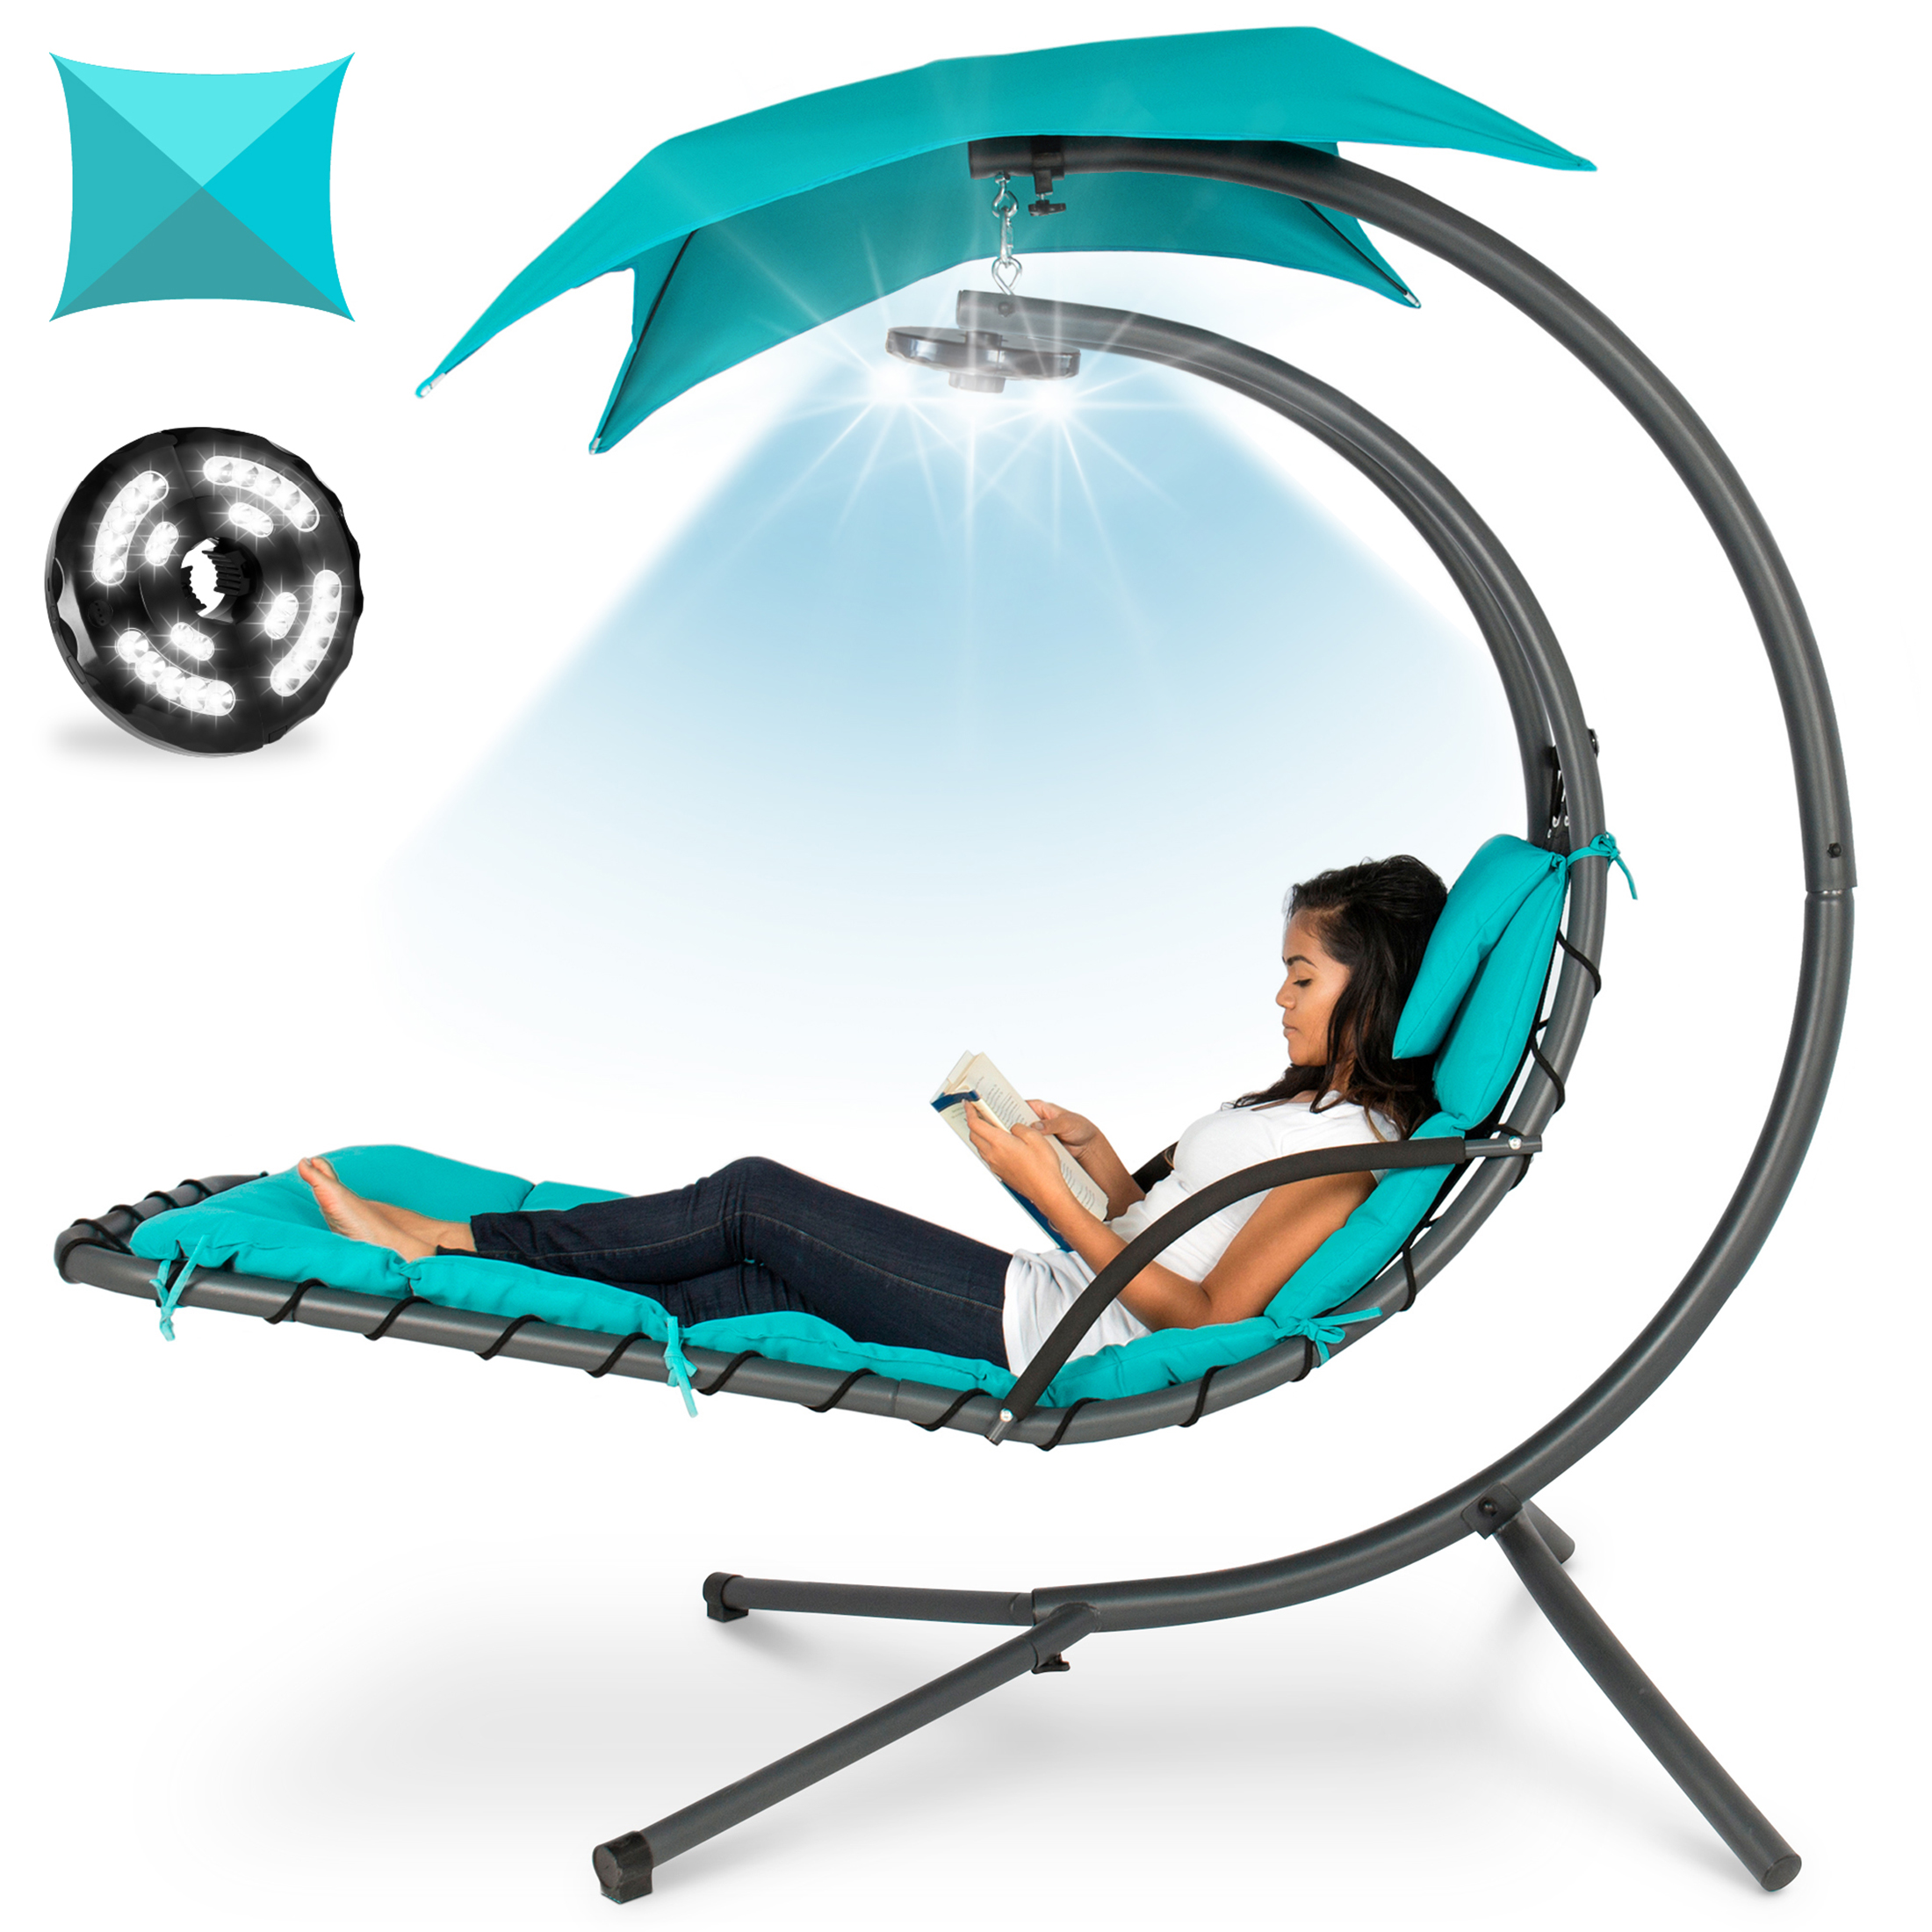 Best Choice Products Hanging LED-Lit Curved Chaise Lounge Chair for Backyard, Patio w/ Pillow, Canopy, Stand - Teal - image 1 of 7